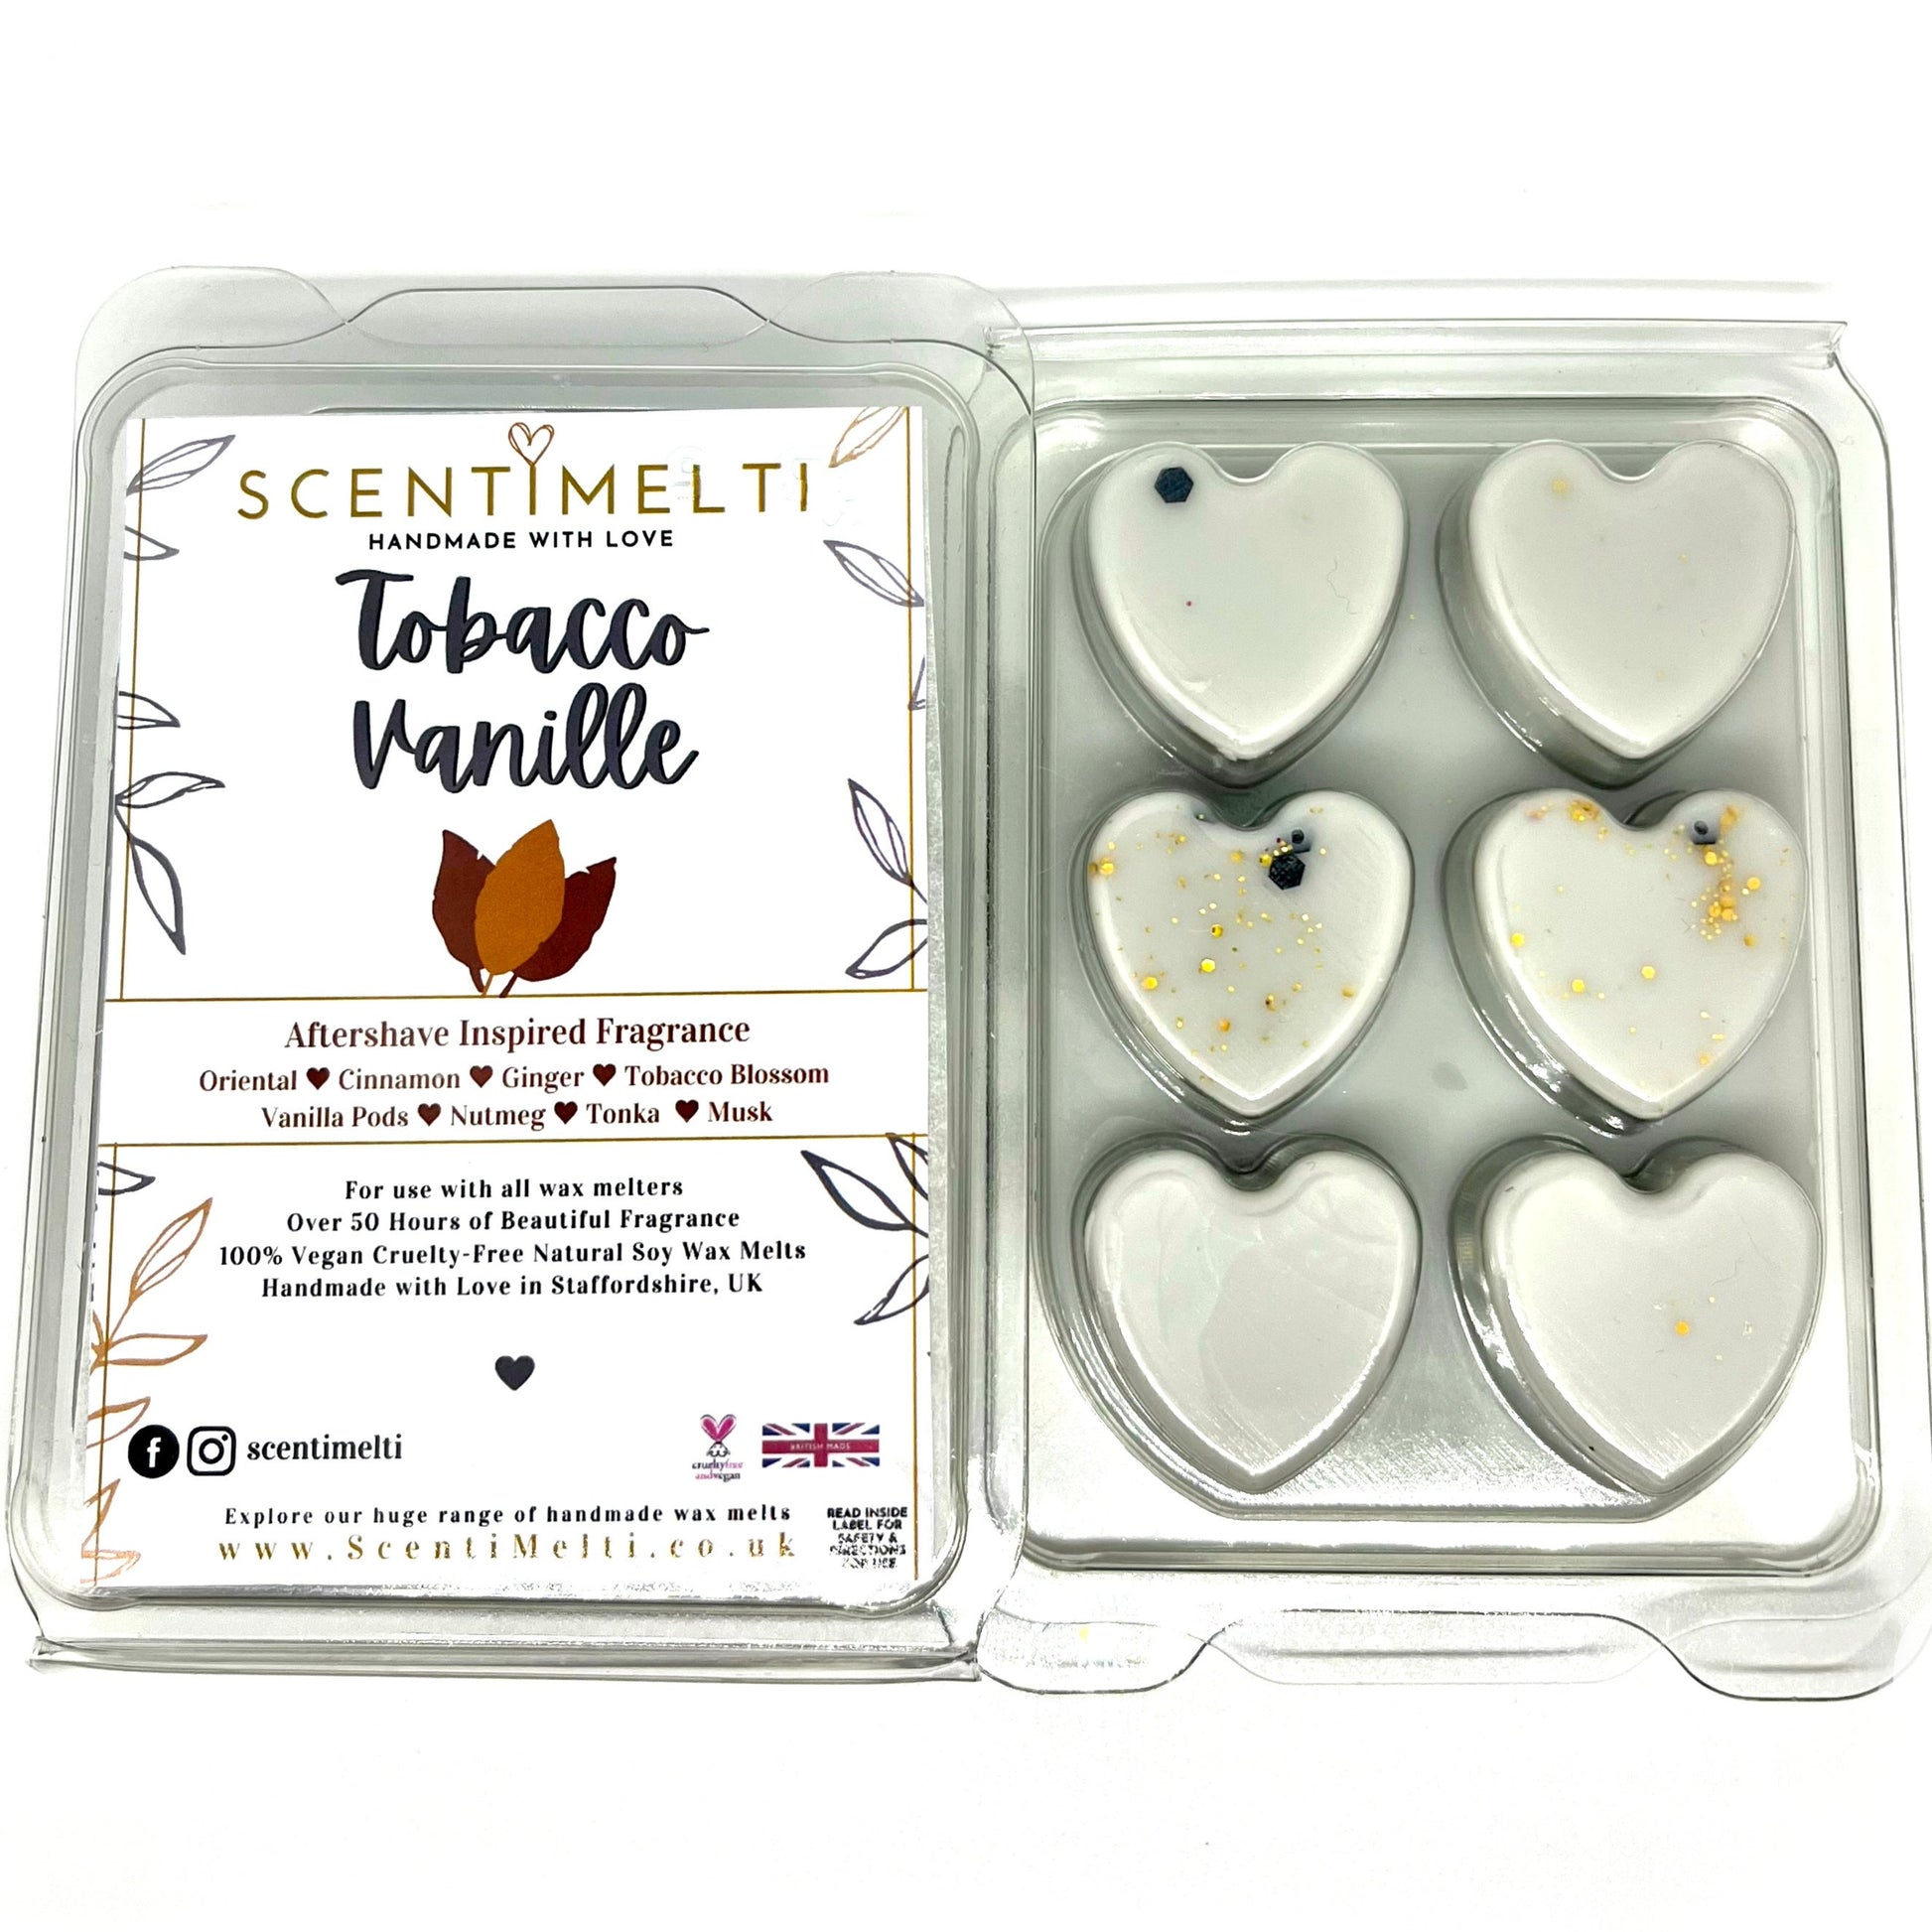 Tobacco Vanille Heart Clamshell Wax Melts - ScentiMelti  Tobacco Vanille Heart Clamshell Wax Melts